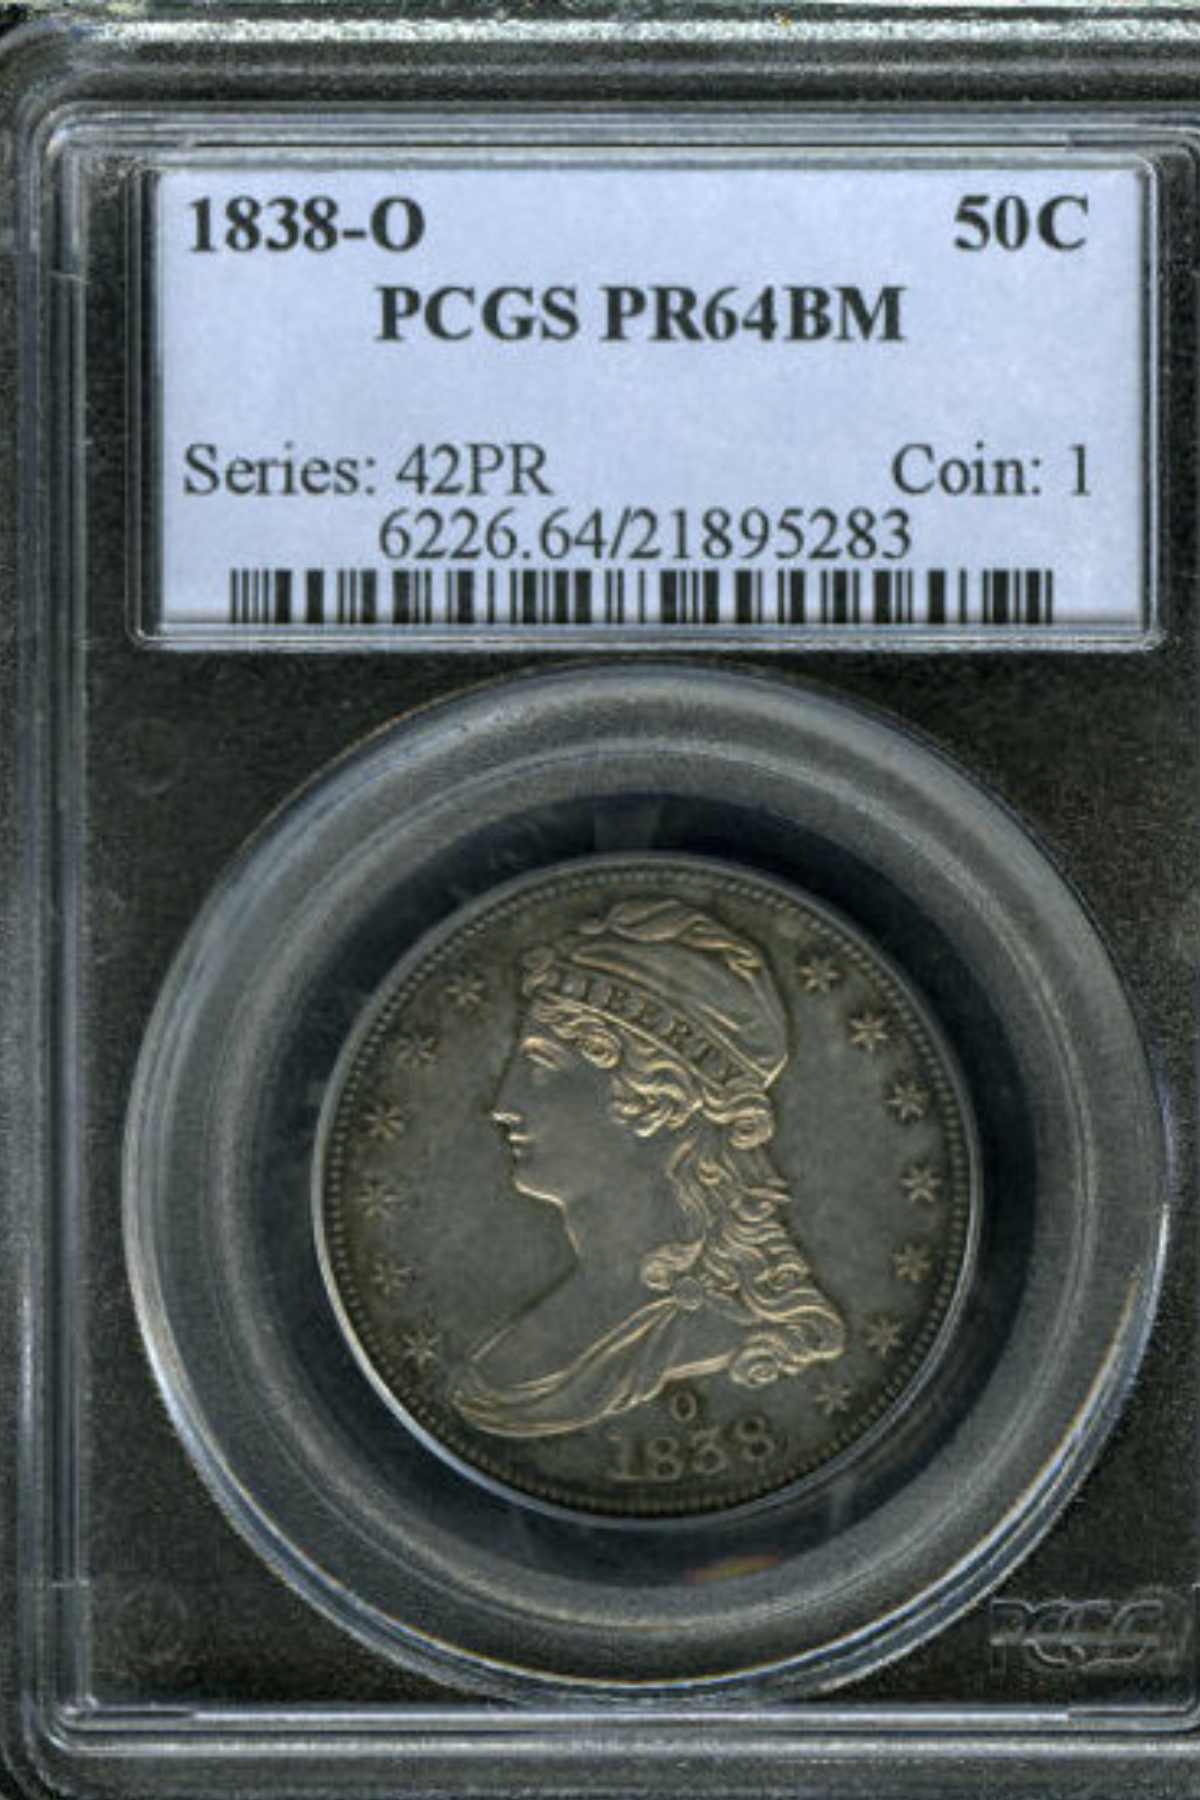 1838-O Proof Half Dollar Sold for $632,500